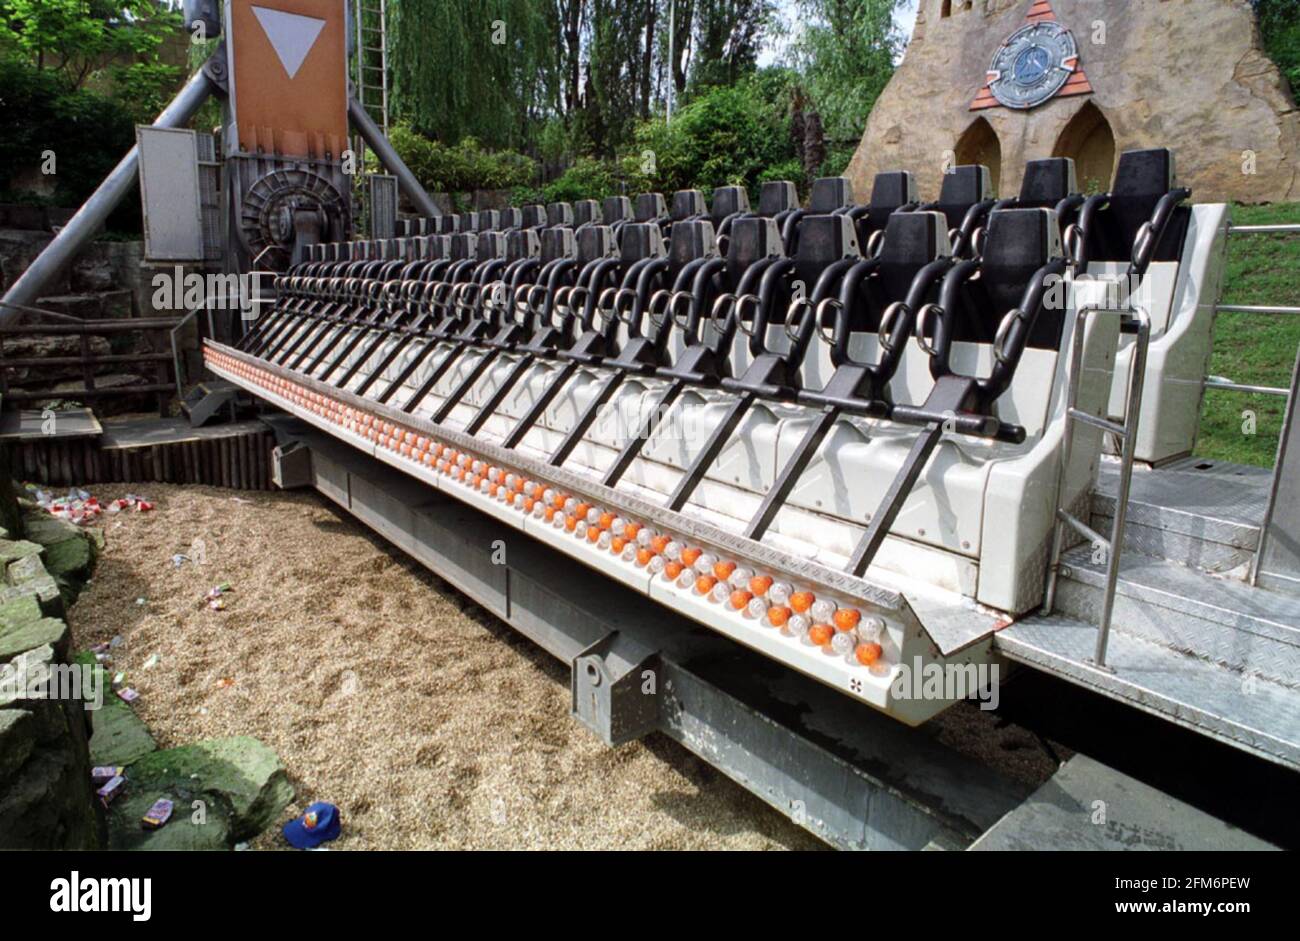 THE RAMESES REVENGE RIDE AT CHESSINGTON WORLD OF ADVENTURES FAILED TODAY, LEAVING PASSENGERS STRANDED, BEFORE BEING RESCUED.  PIC SHOWS THE RIDE AFTER THE INCIDENT. Stock Photo